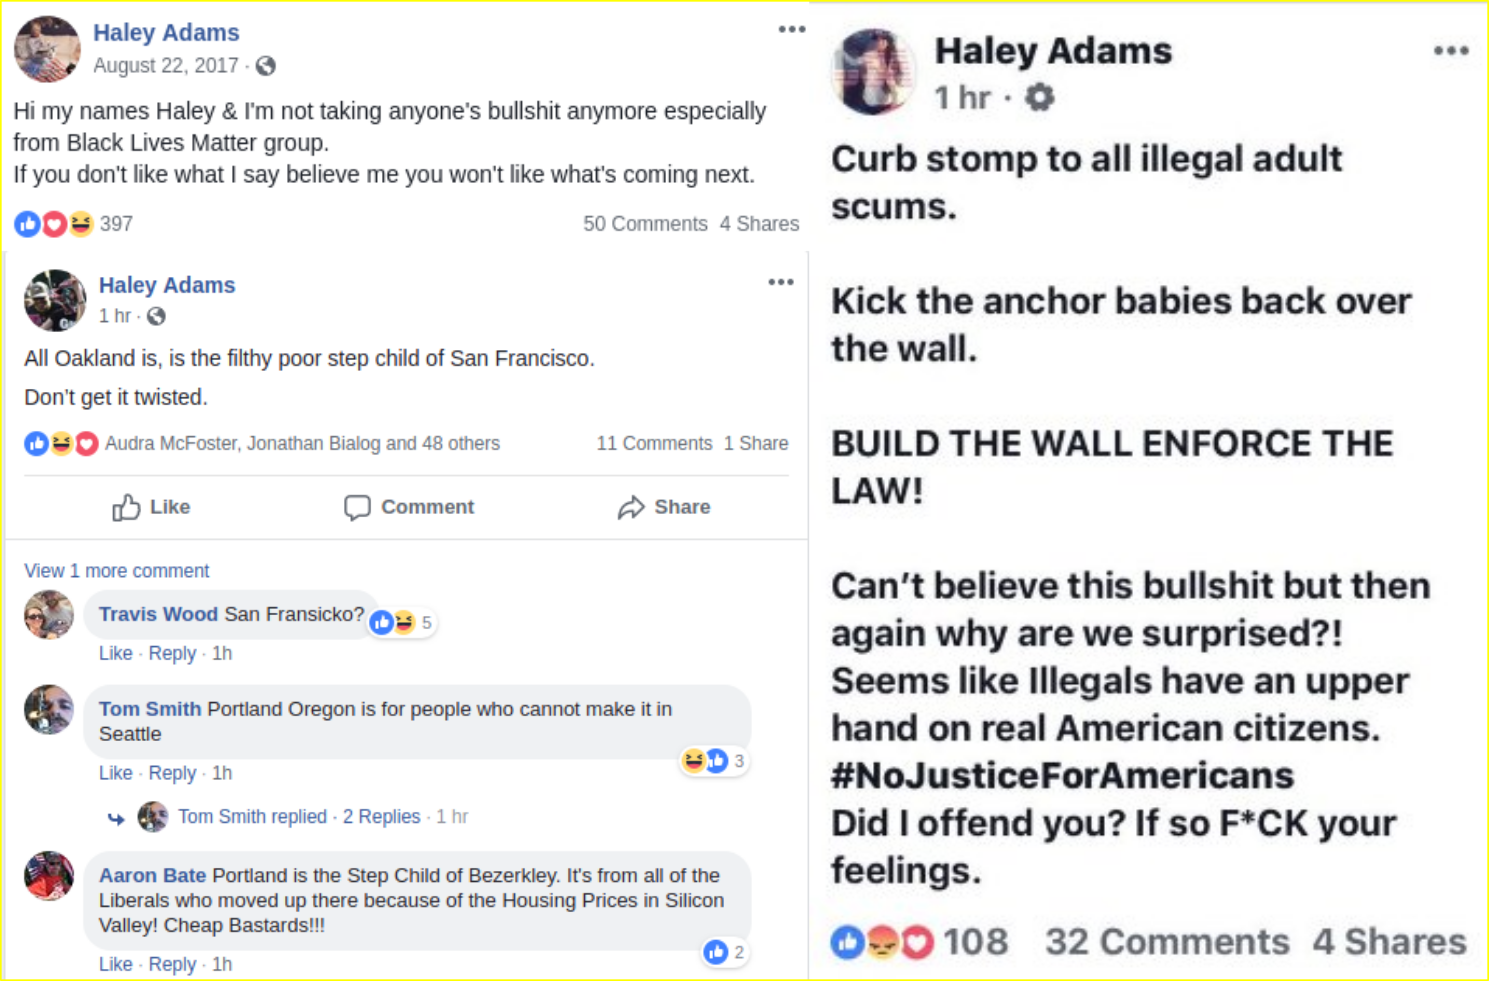 Haley Adams is a white supremacist who rallies people to violence